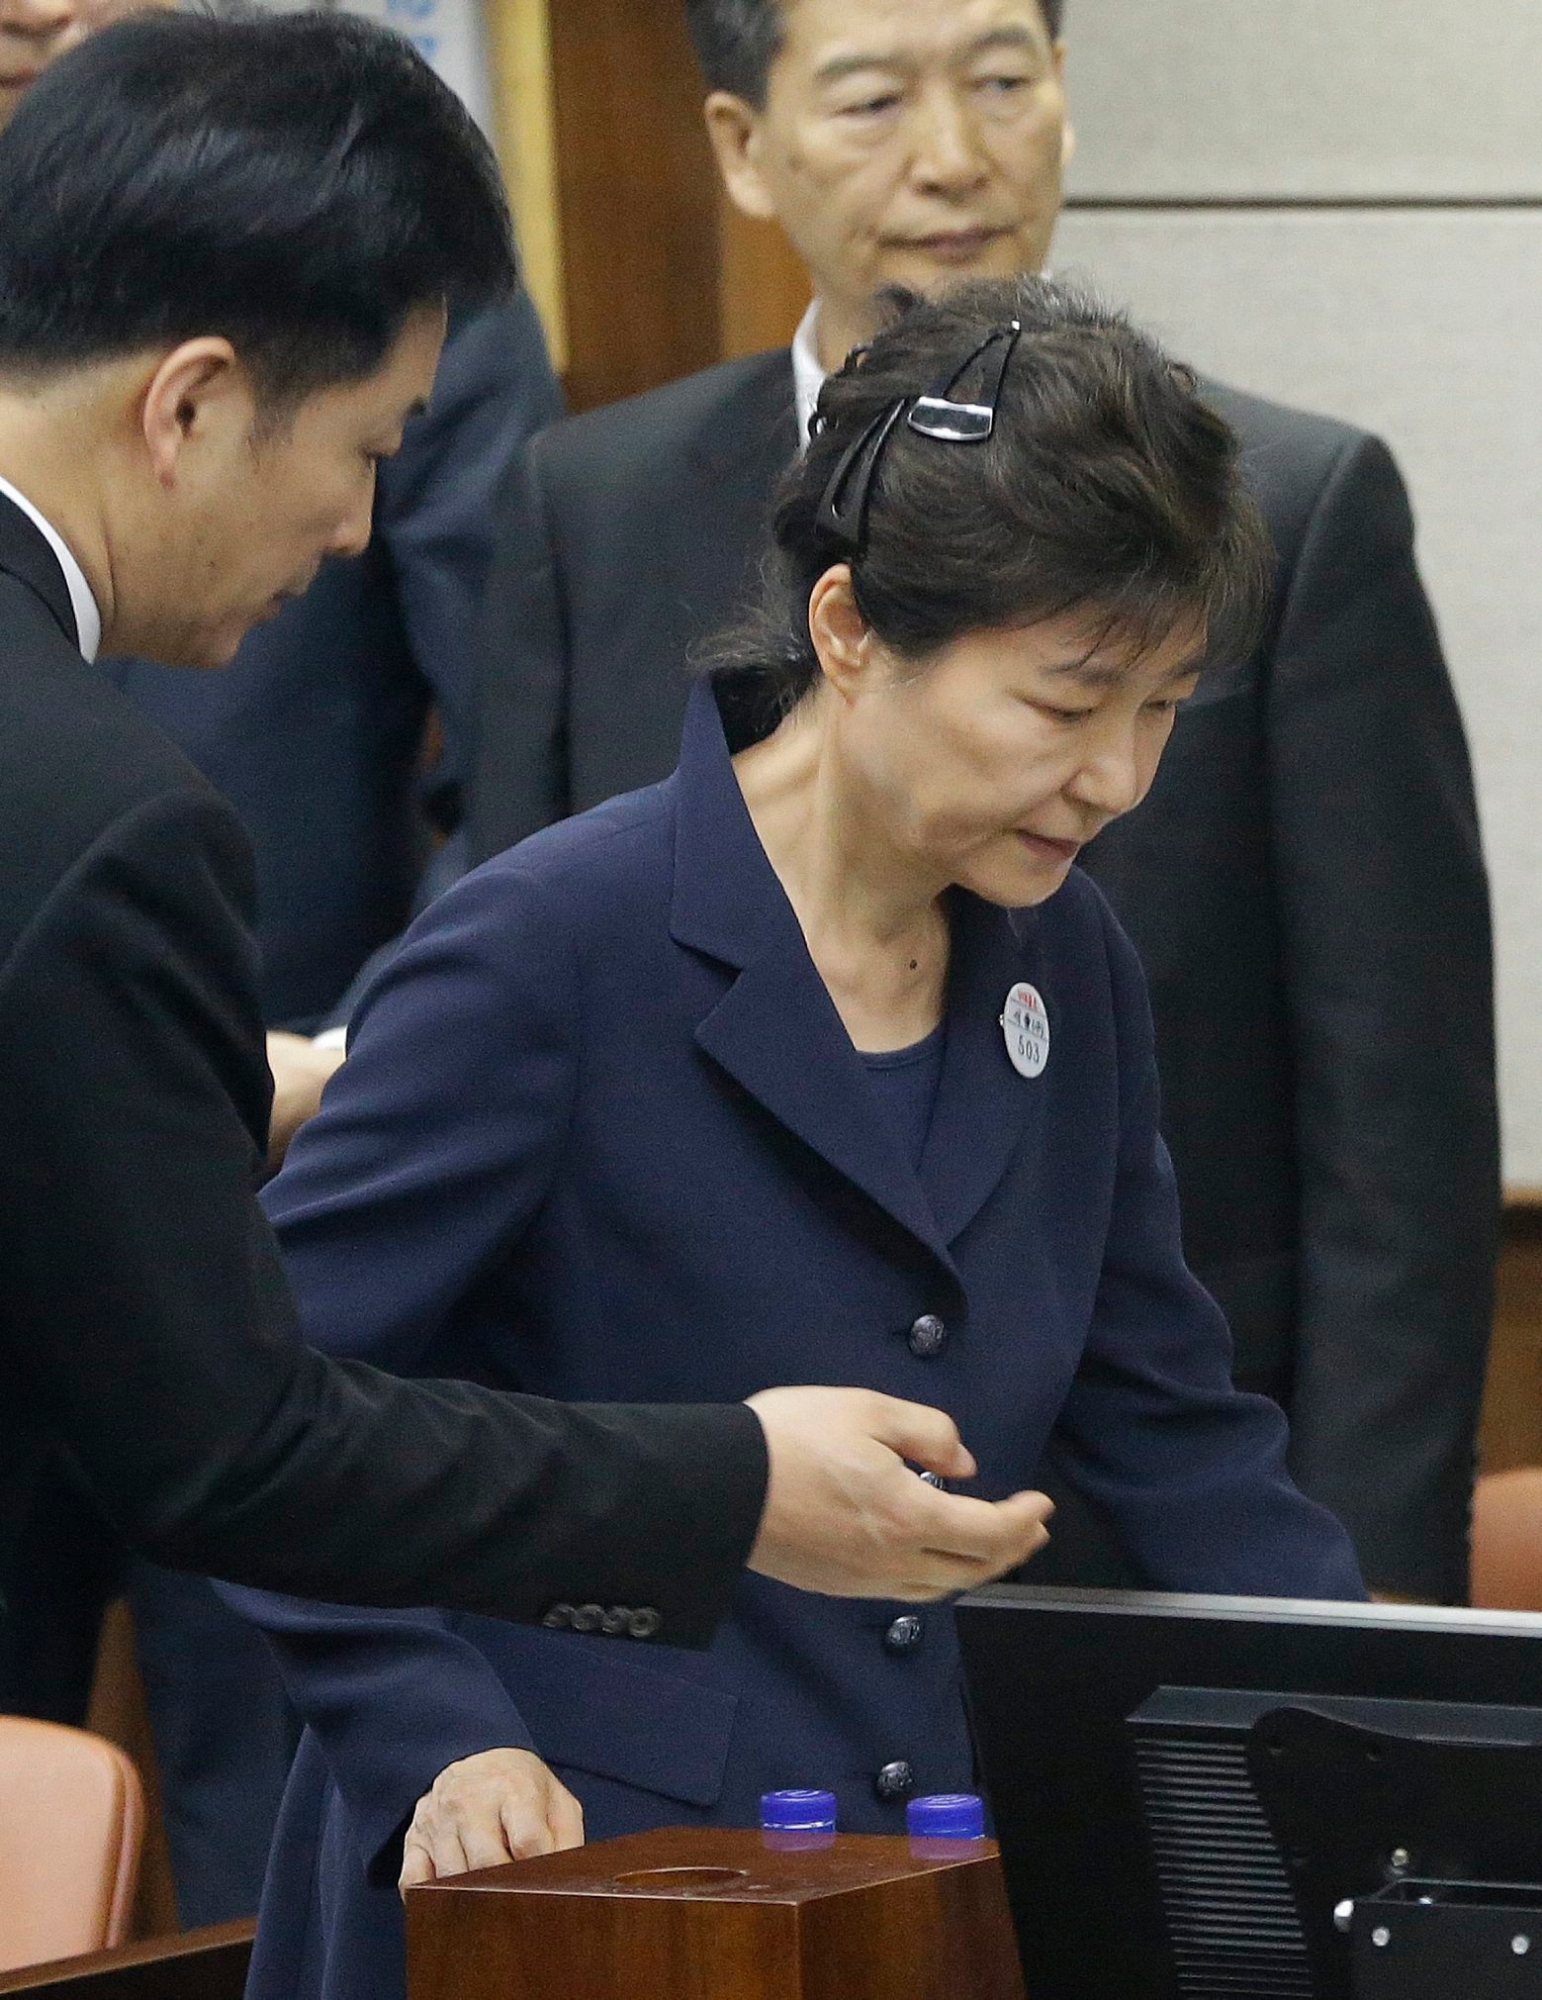 Former South Korean President Park Geun-hye, center, arrives for her trial at the Seoul Central District Court in Seoul, South Korea, Tuesday, May 23, 2017. (AP Photo/Ahn Young-joon, Pool) South Korea Park's Trial